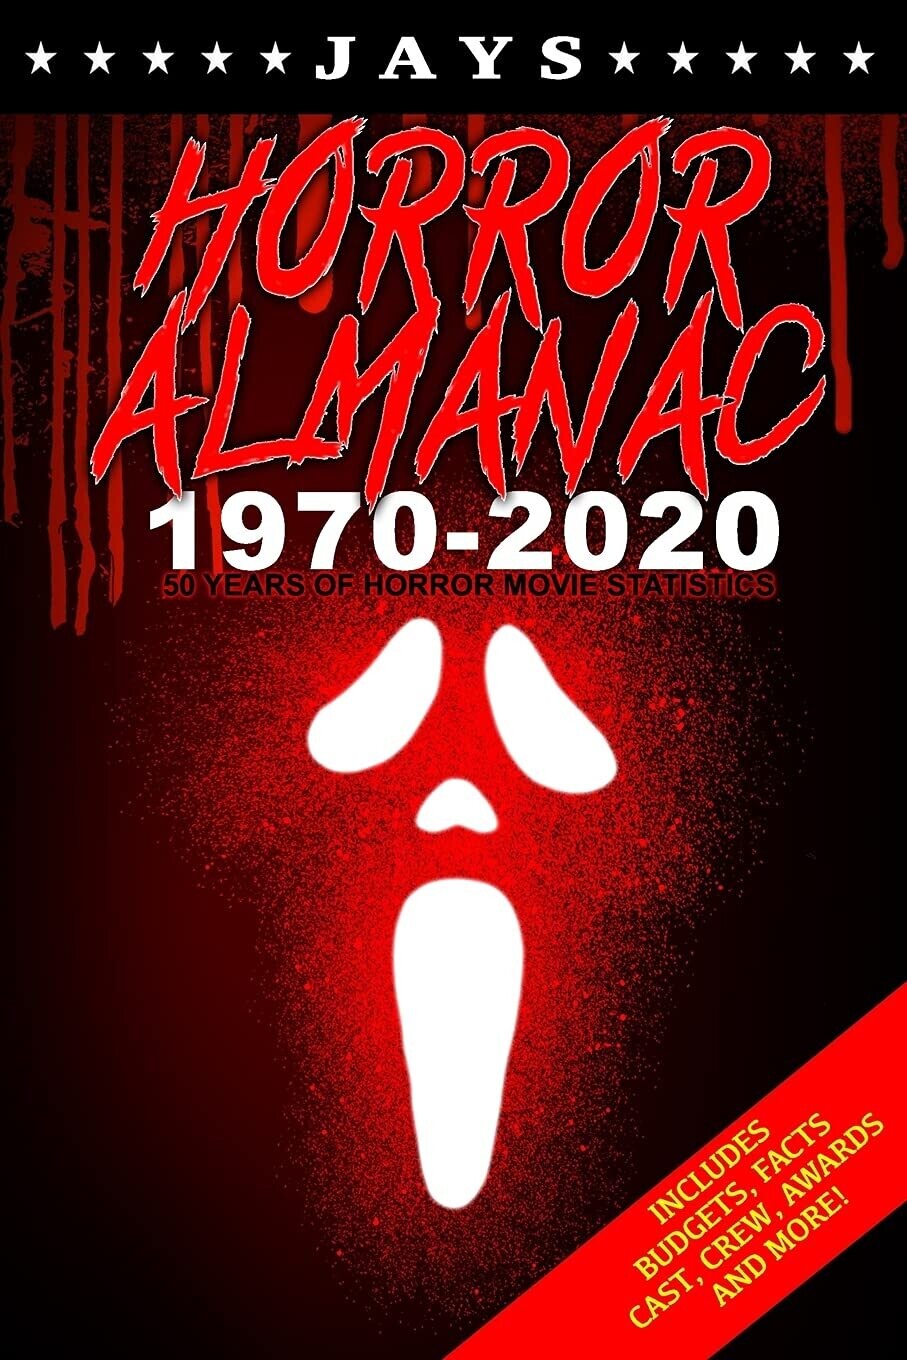 Jays Horror Almanac 1970-2020: 50 Years of Horror Movie Statistics Book (Includes Budgets, Facts, Cast, Crew, Awards & More) [Paperback]